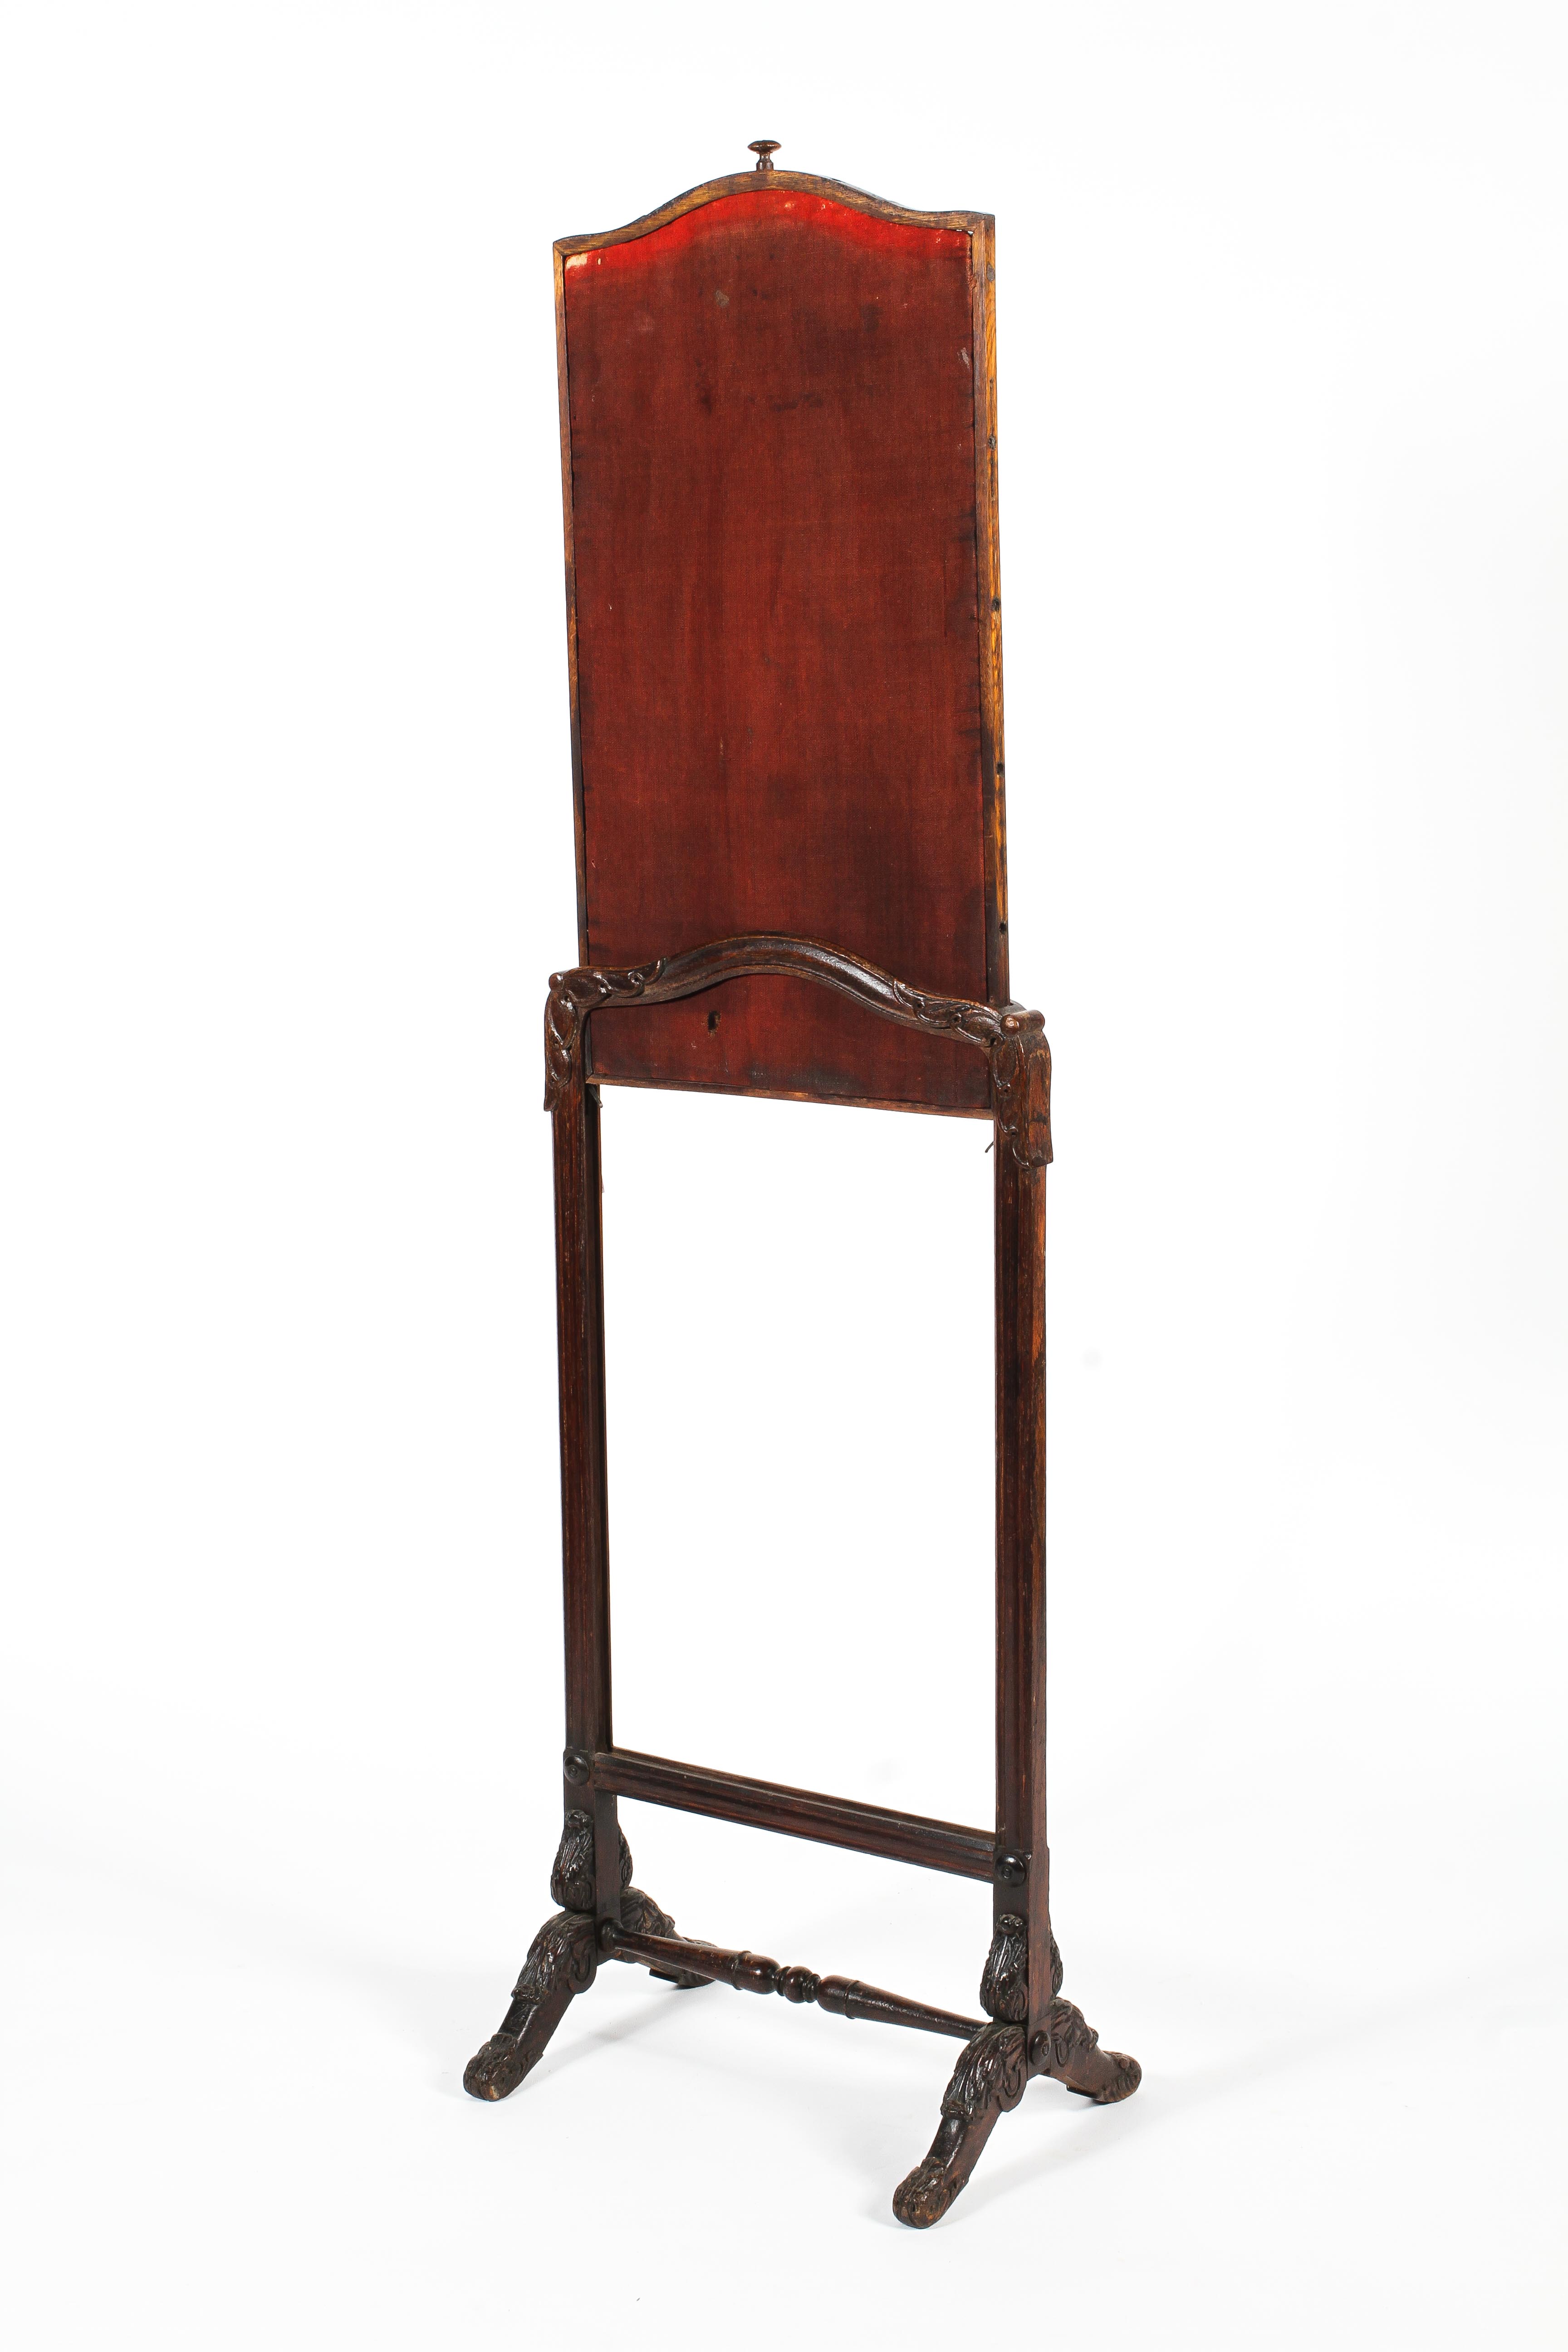 A Victorian stained pine rising fire screen. - Image 2 of 2